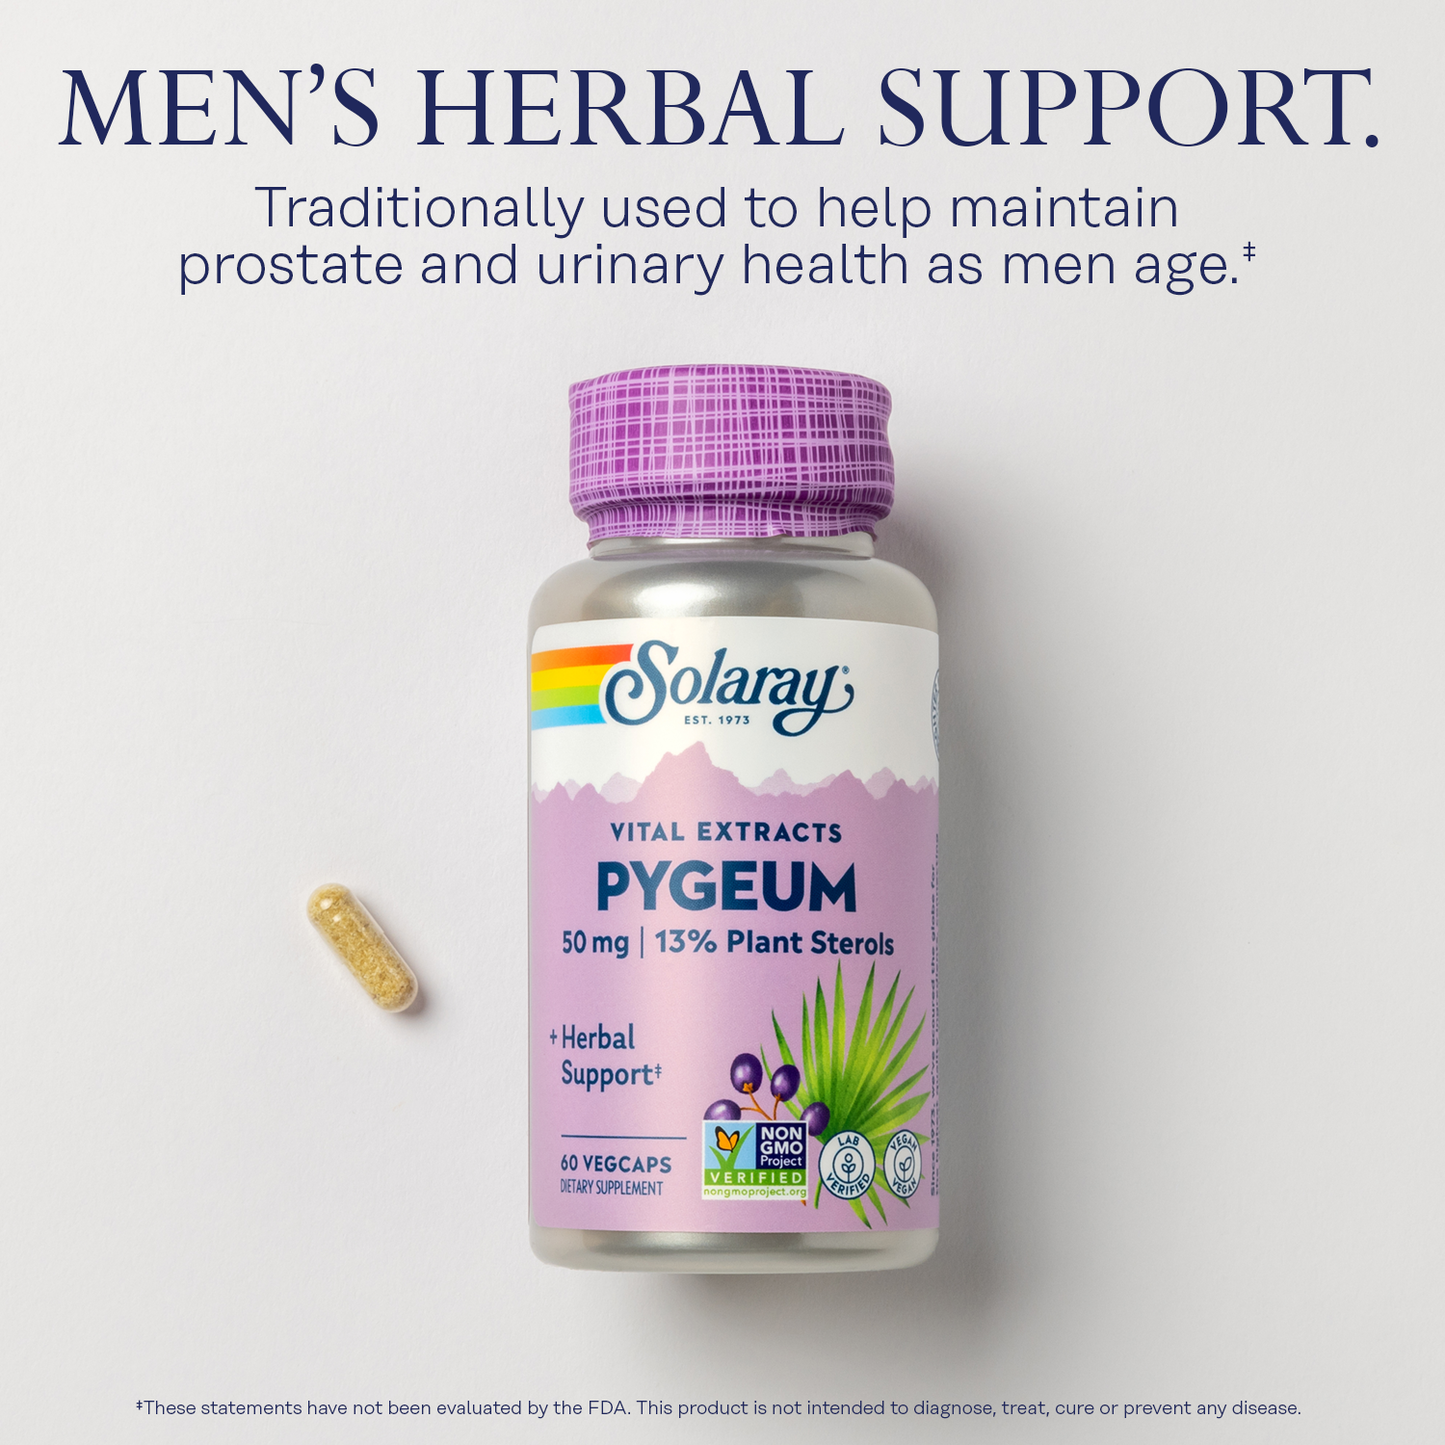 Solaray Pygeum Bark Extract 50mg Healthy Prostate Support Guaranteed to Contain 6.5mg Total Plant Sterols Non-GMO 60 VegCaps